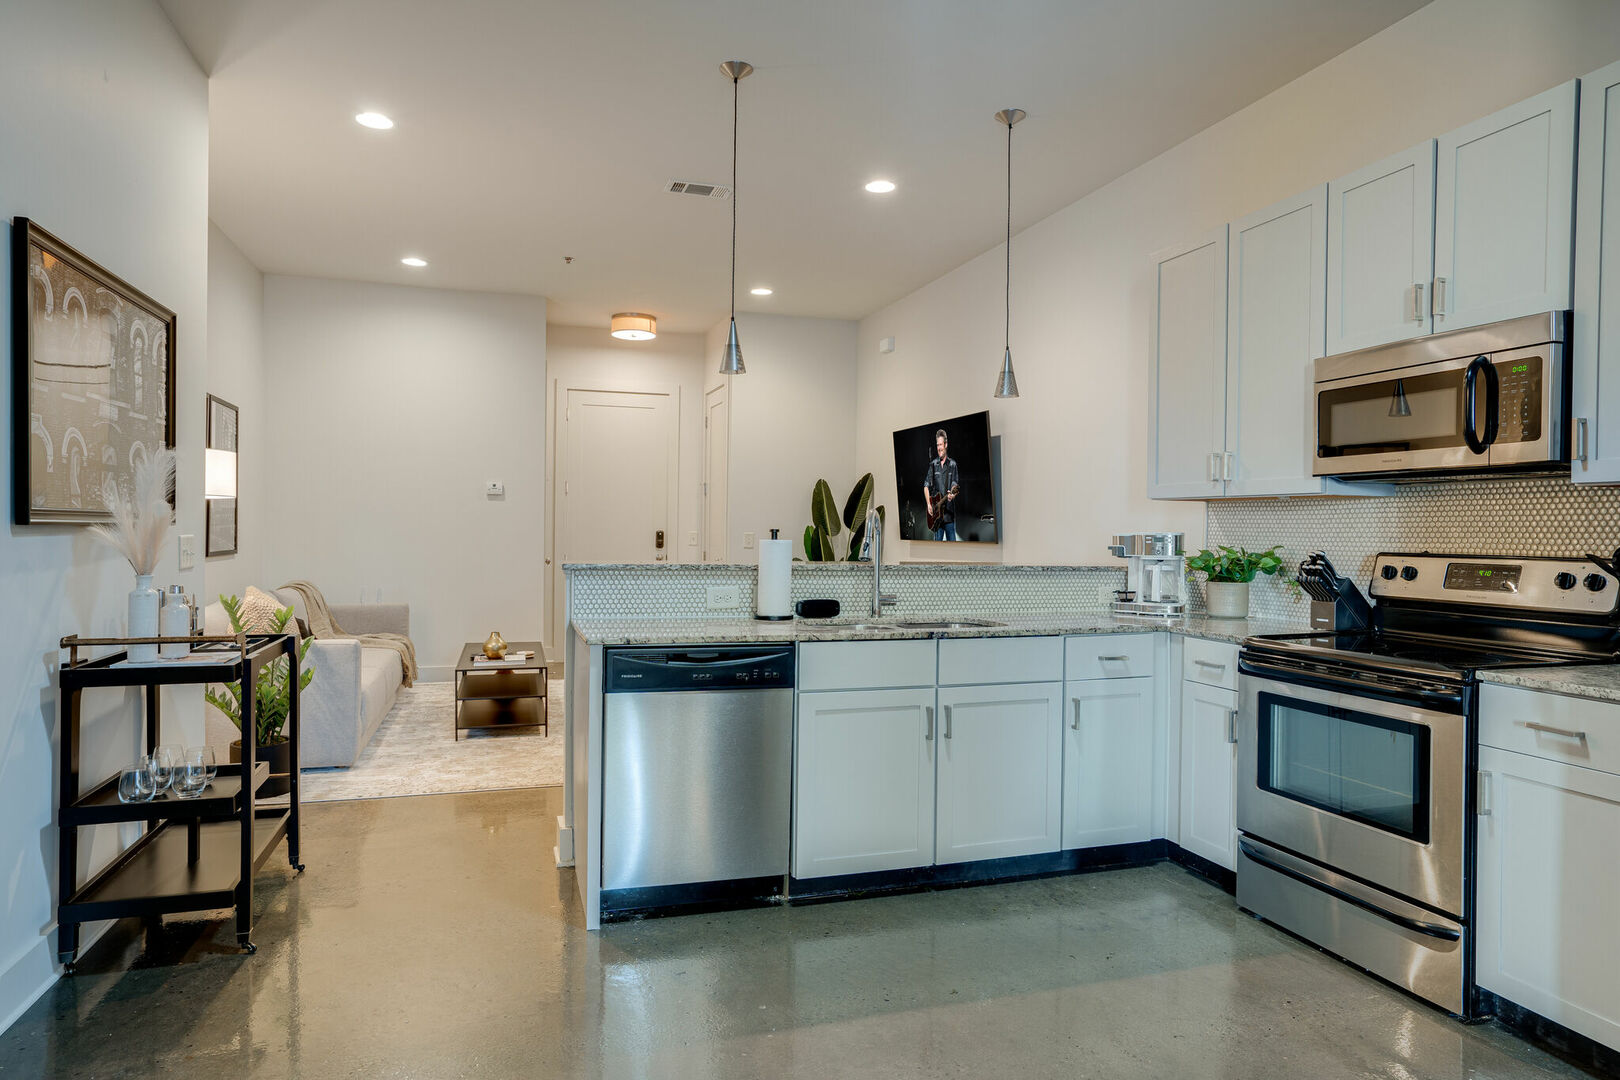 Fully equipped kitchen with stainless steel appliances, breakfast bar seating, and fully stocked with your basic cooking essentials.